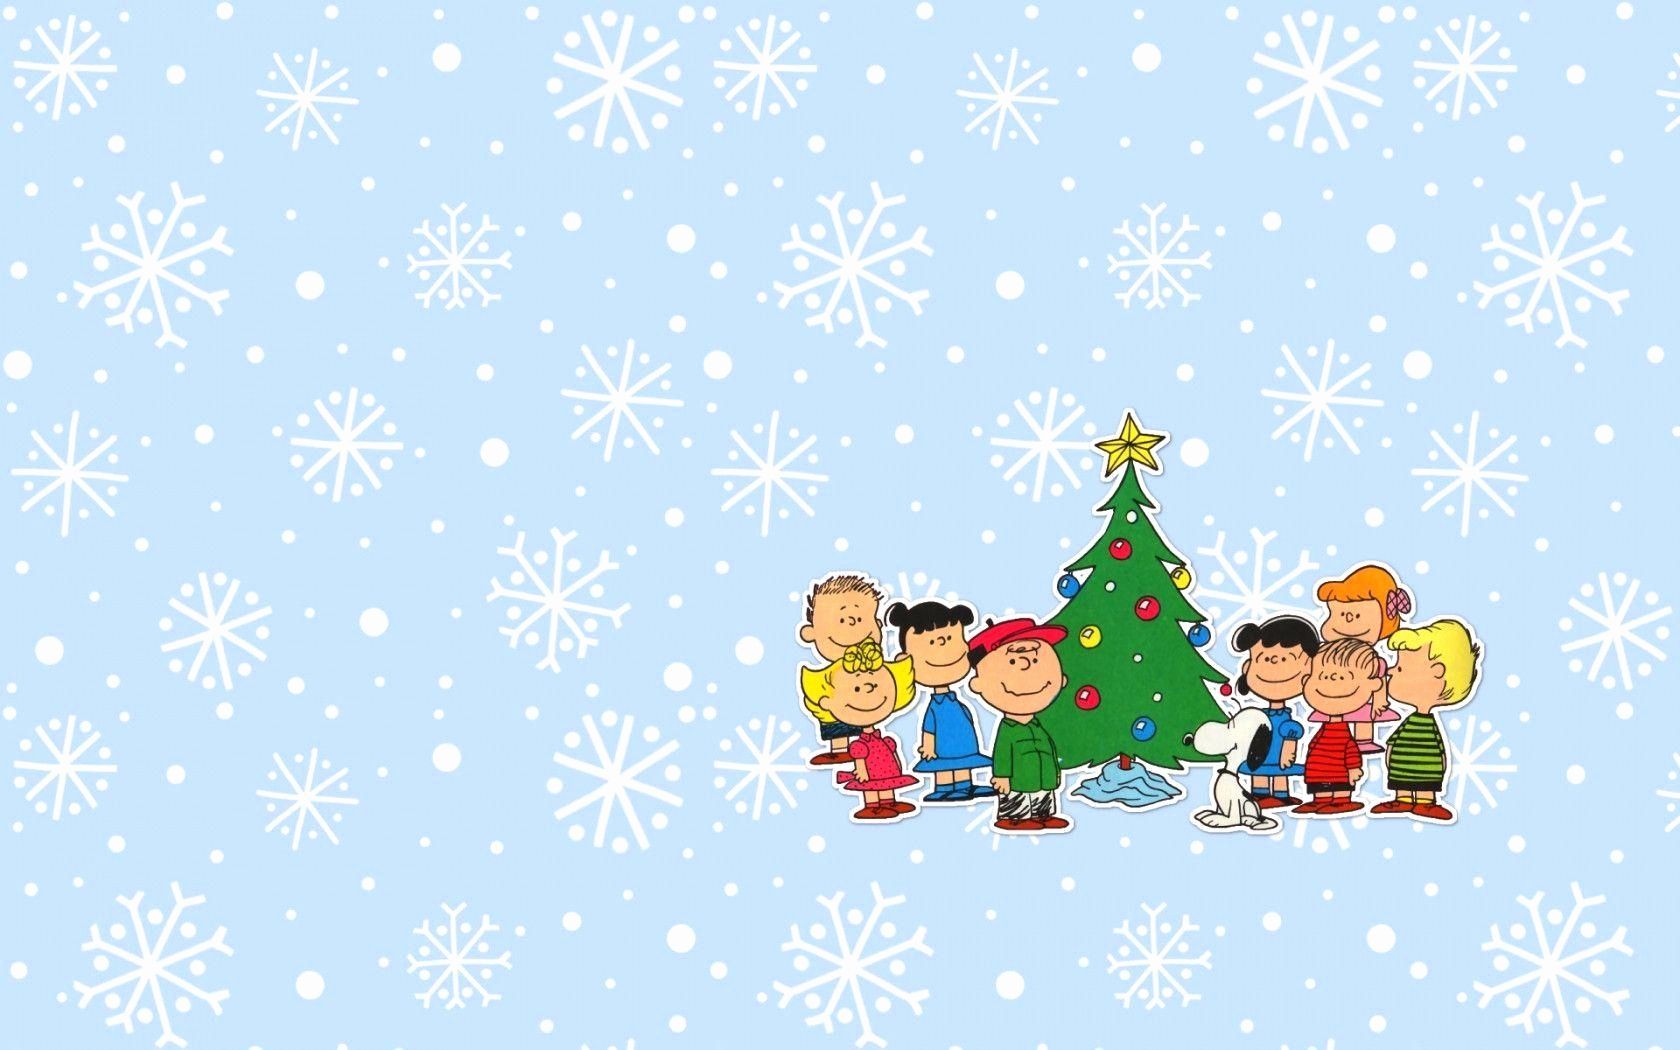 Snoopy Christmas Wallpaper Unique Charlie Brown Christmas Wallpaper Desktop Of the Day of The Hudson